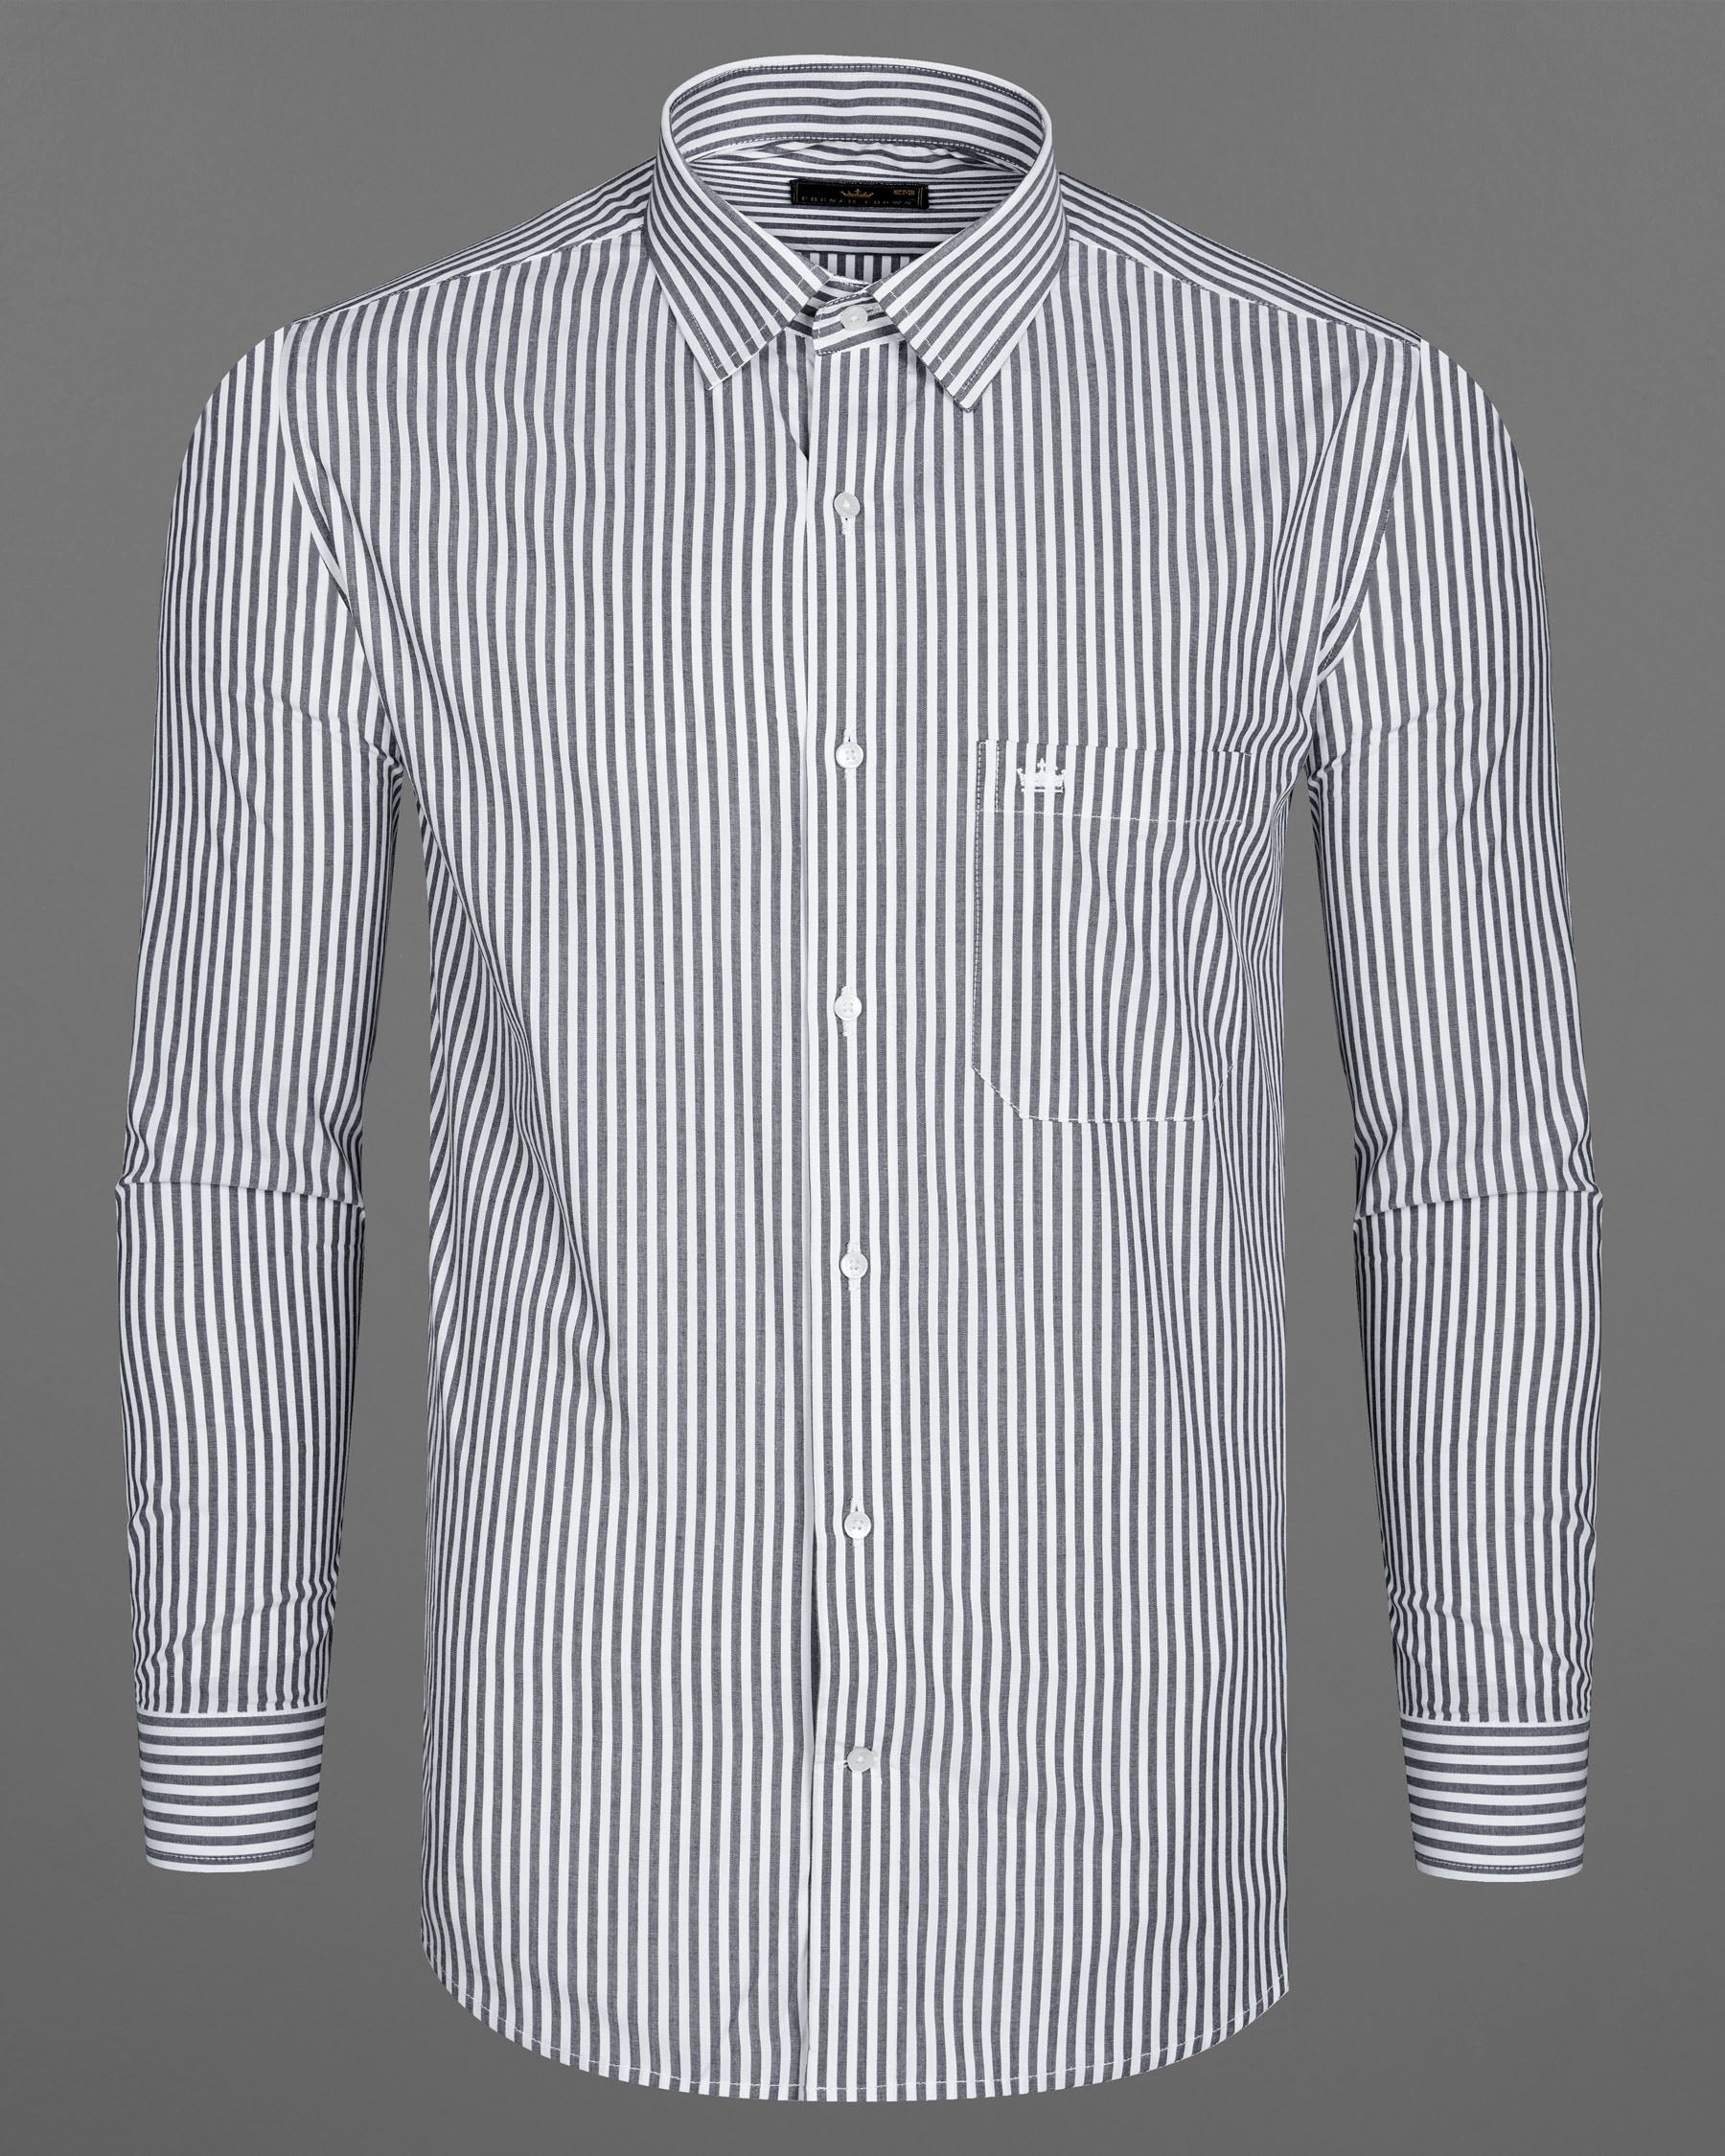 Dolphin Gray and White Striped Premium Cotton Shirt 7966-38,7966-H-38,7966-39,7966-H-39,7966-40,7966-H-40,7966-42,7966-H-42,7966-44,7966-H-44,7966-46,7966-H-46,7966-48,7966-H-48,7966-50,7966-H-50,7966-52,7966-H-52